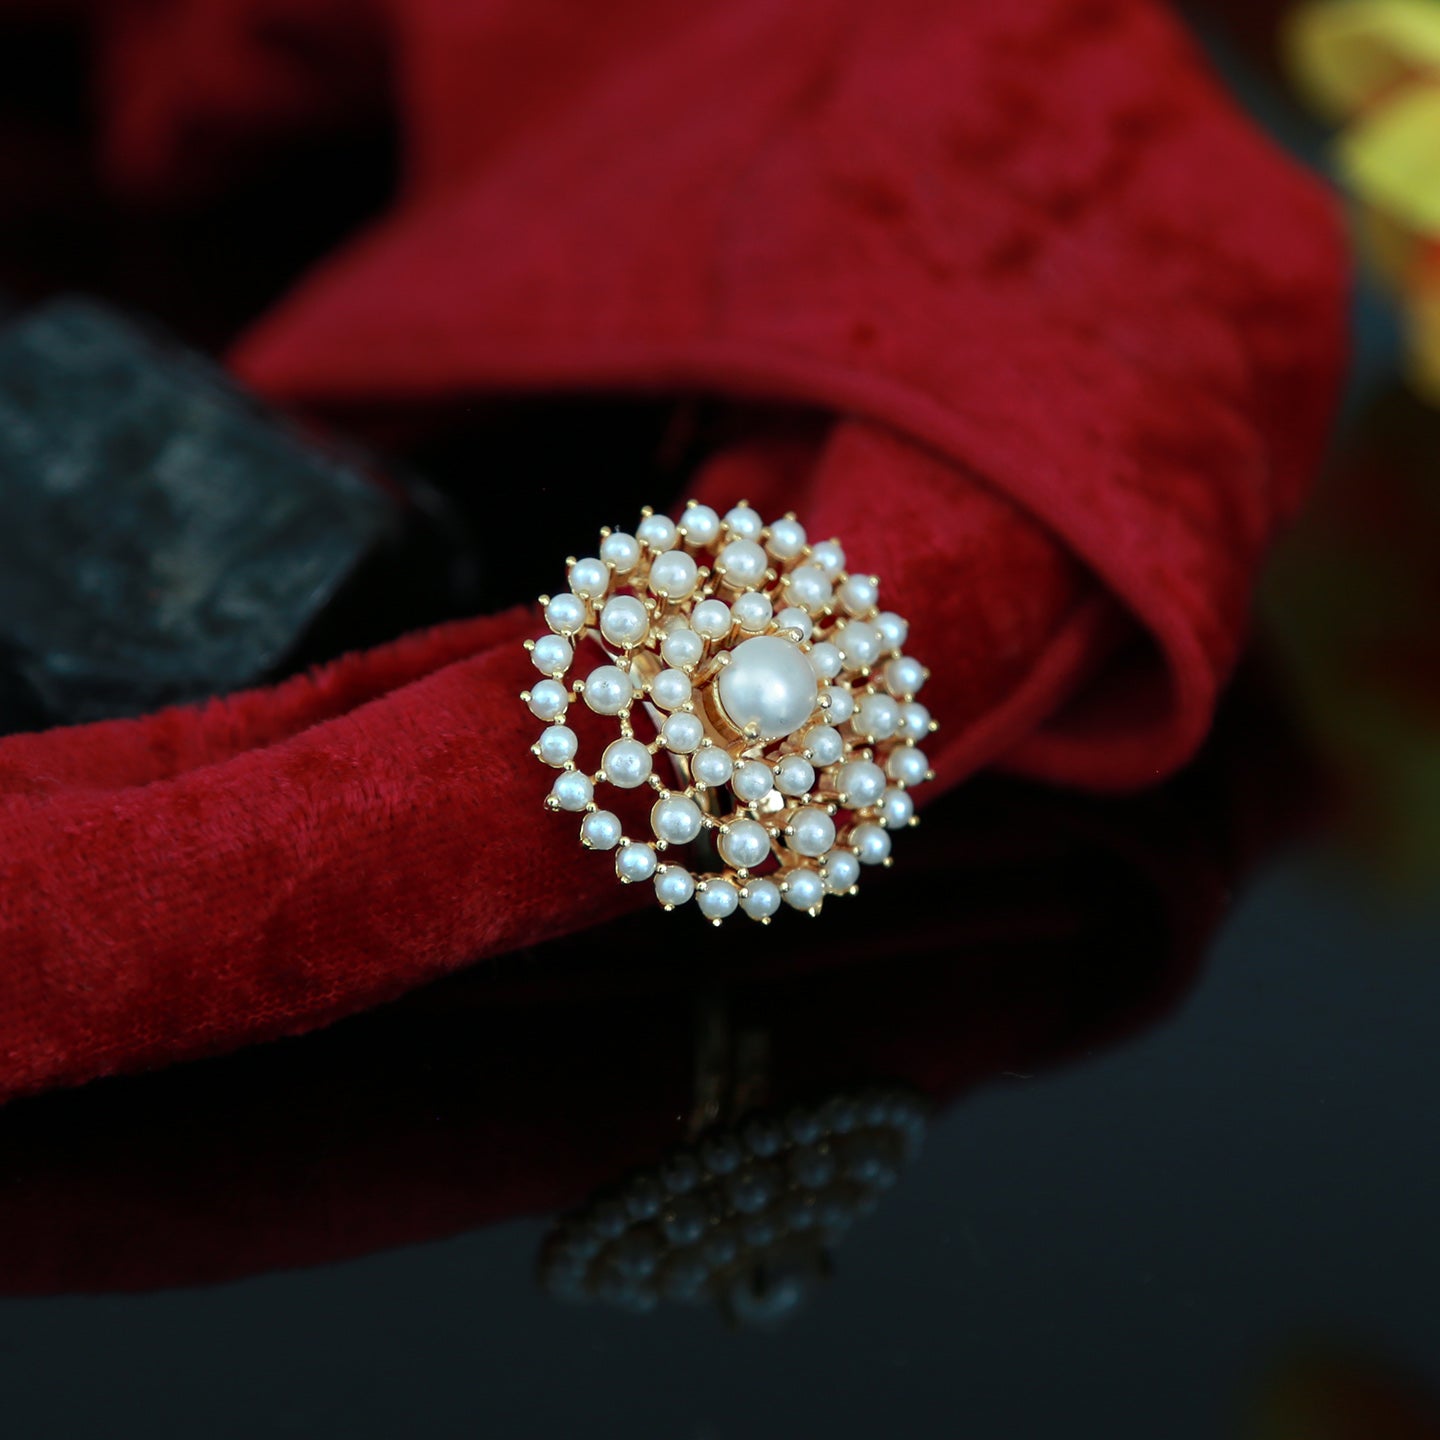 Indian Filigree Ring (22K Gold) - RiLg4691 - 22K Gold Indian Ring with  filigree and frosty designs. | Gold ring designs, Bridal gold jewellery,  Ladies gold rings